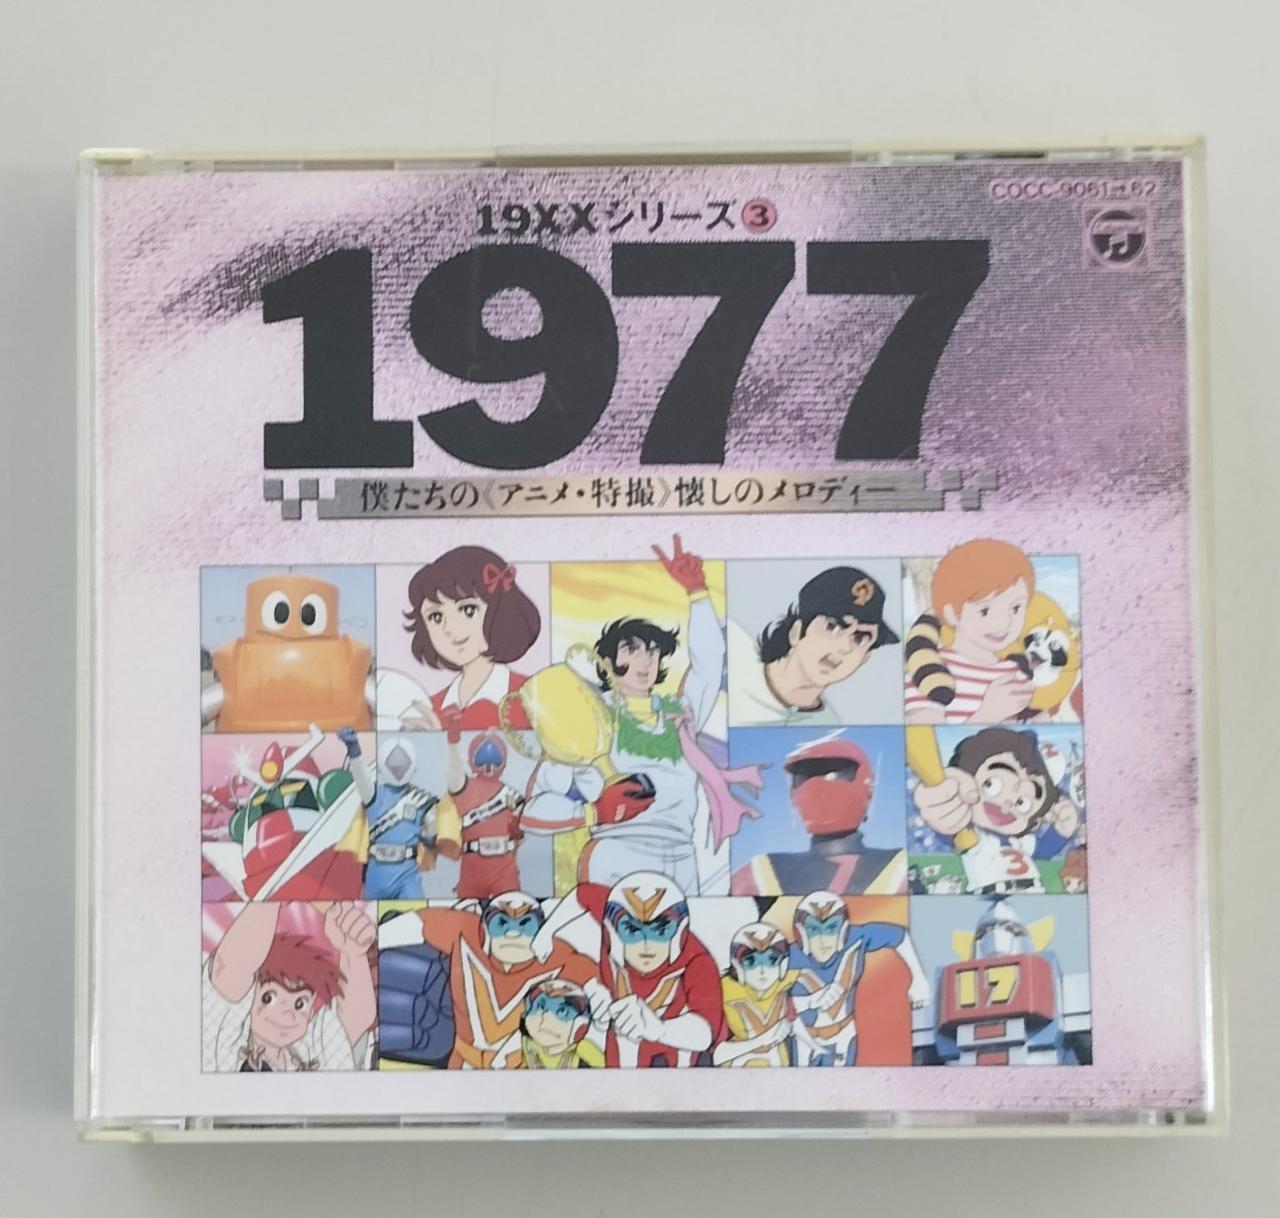 Nippon Columbia 19Xx Series 3 1977 Our Anime Special Effects Nostalgic Melody